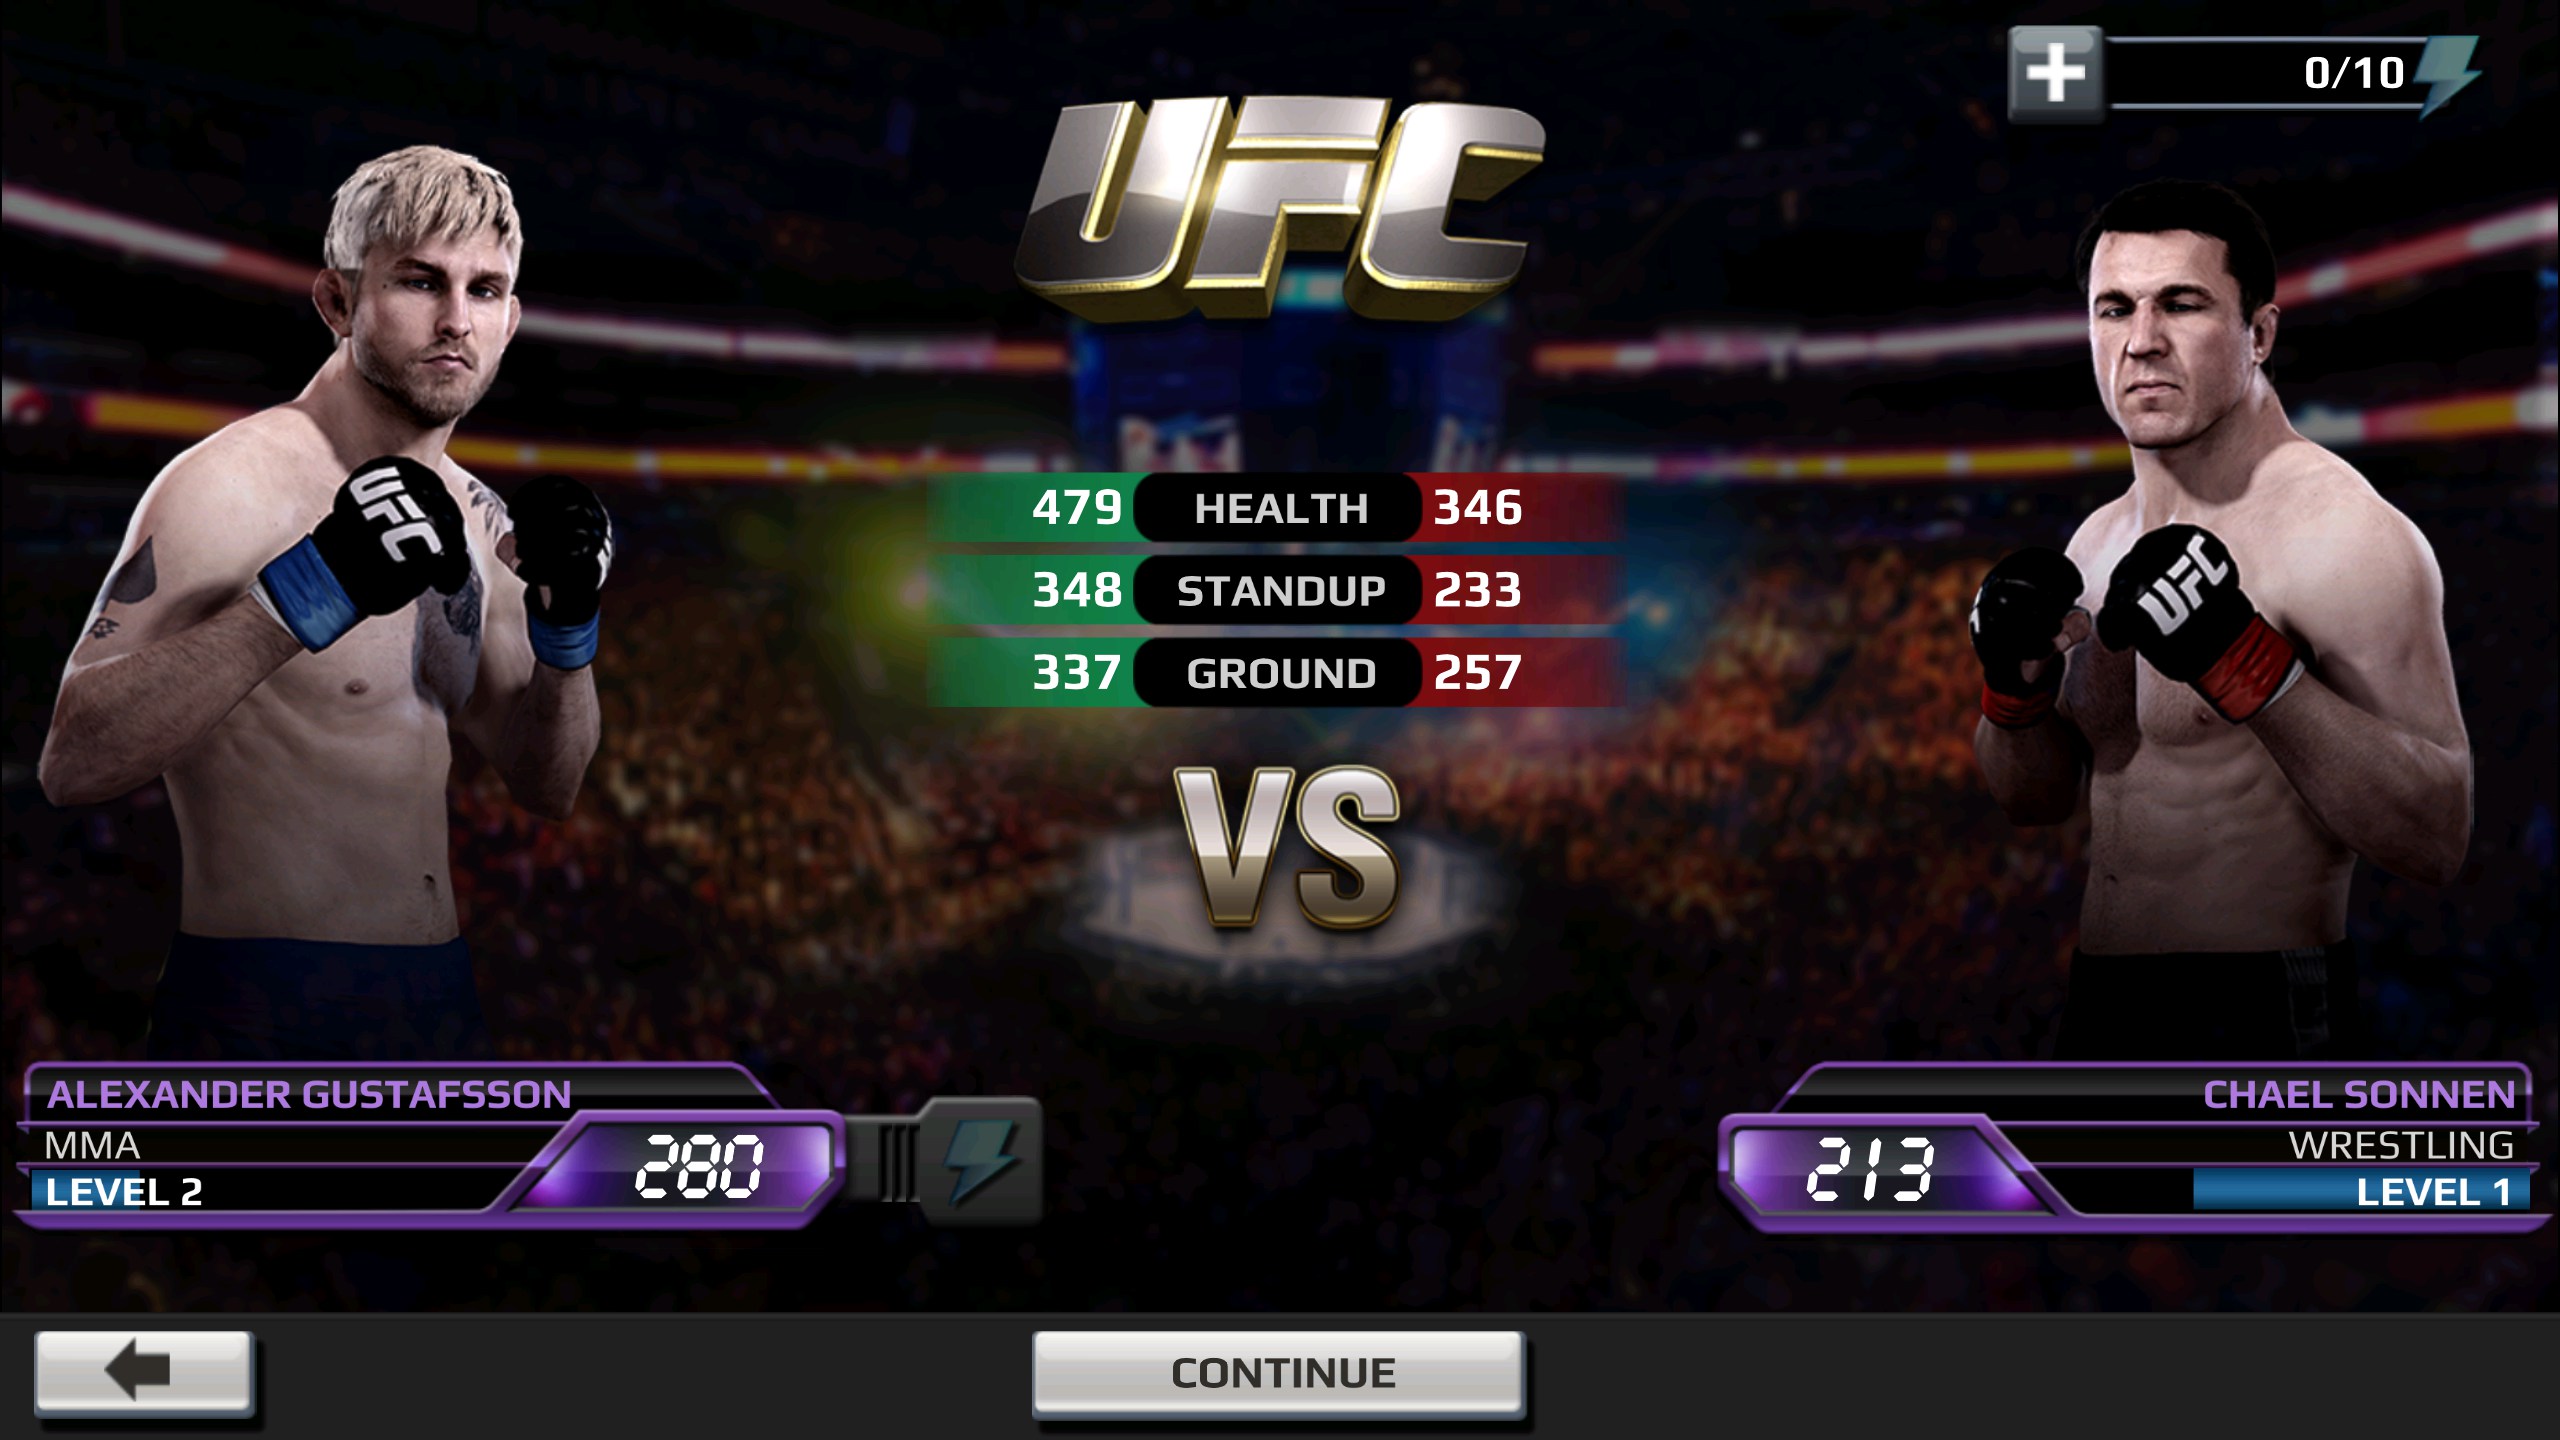 ufc iso free download